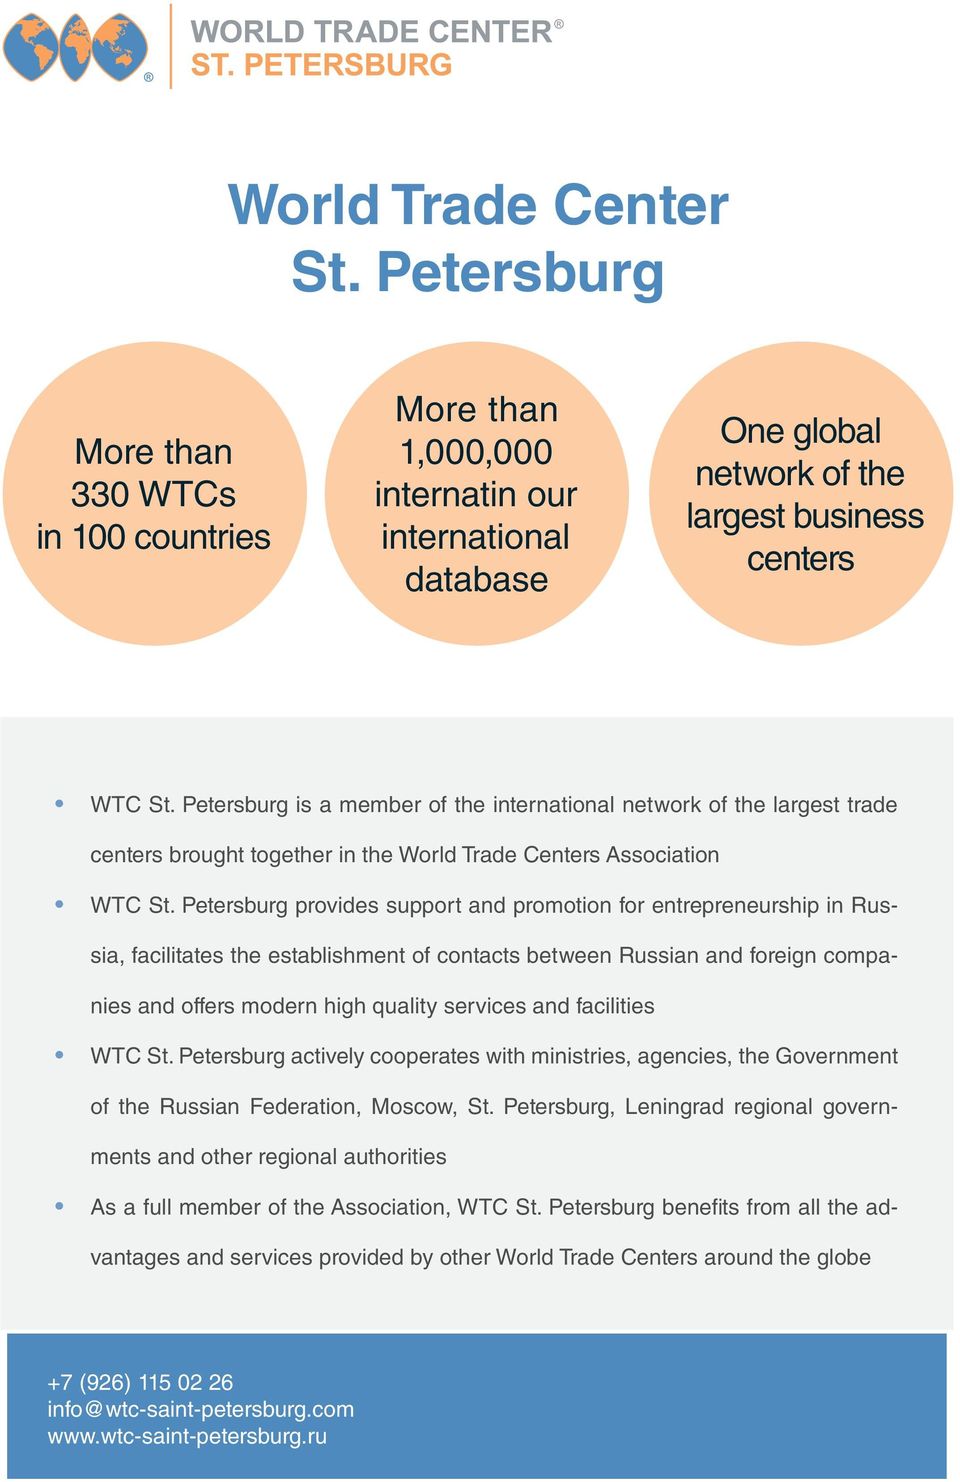 Petersburg provides support and promotion for entrepreneurship in Russia, facilitates the establishment of contacts between Russian and foreign companies and offers modern high quality services and